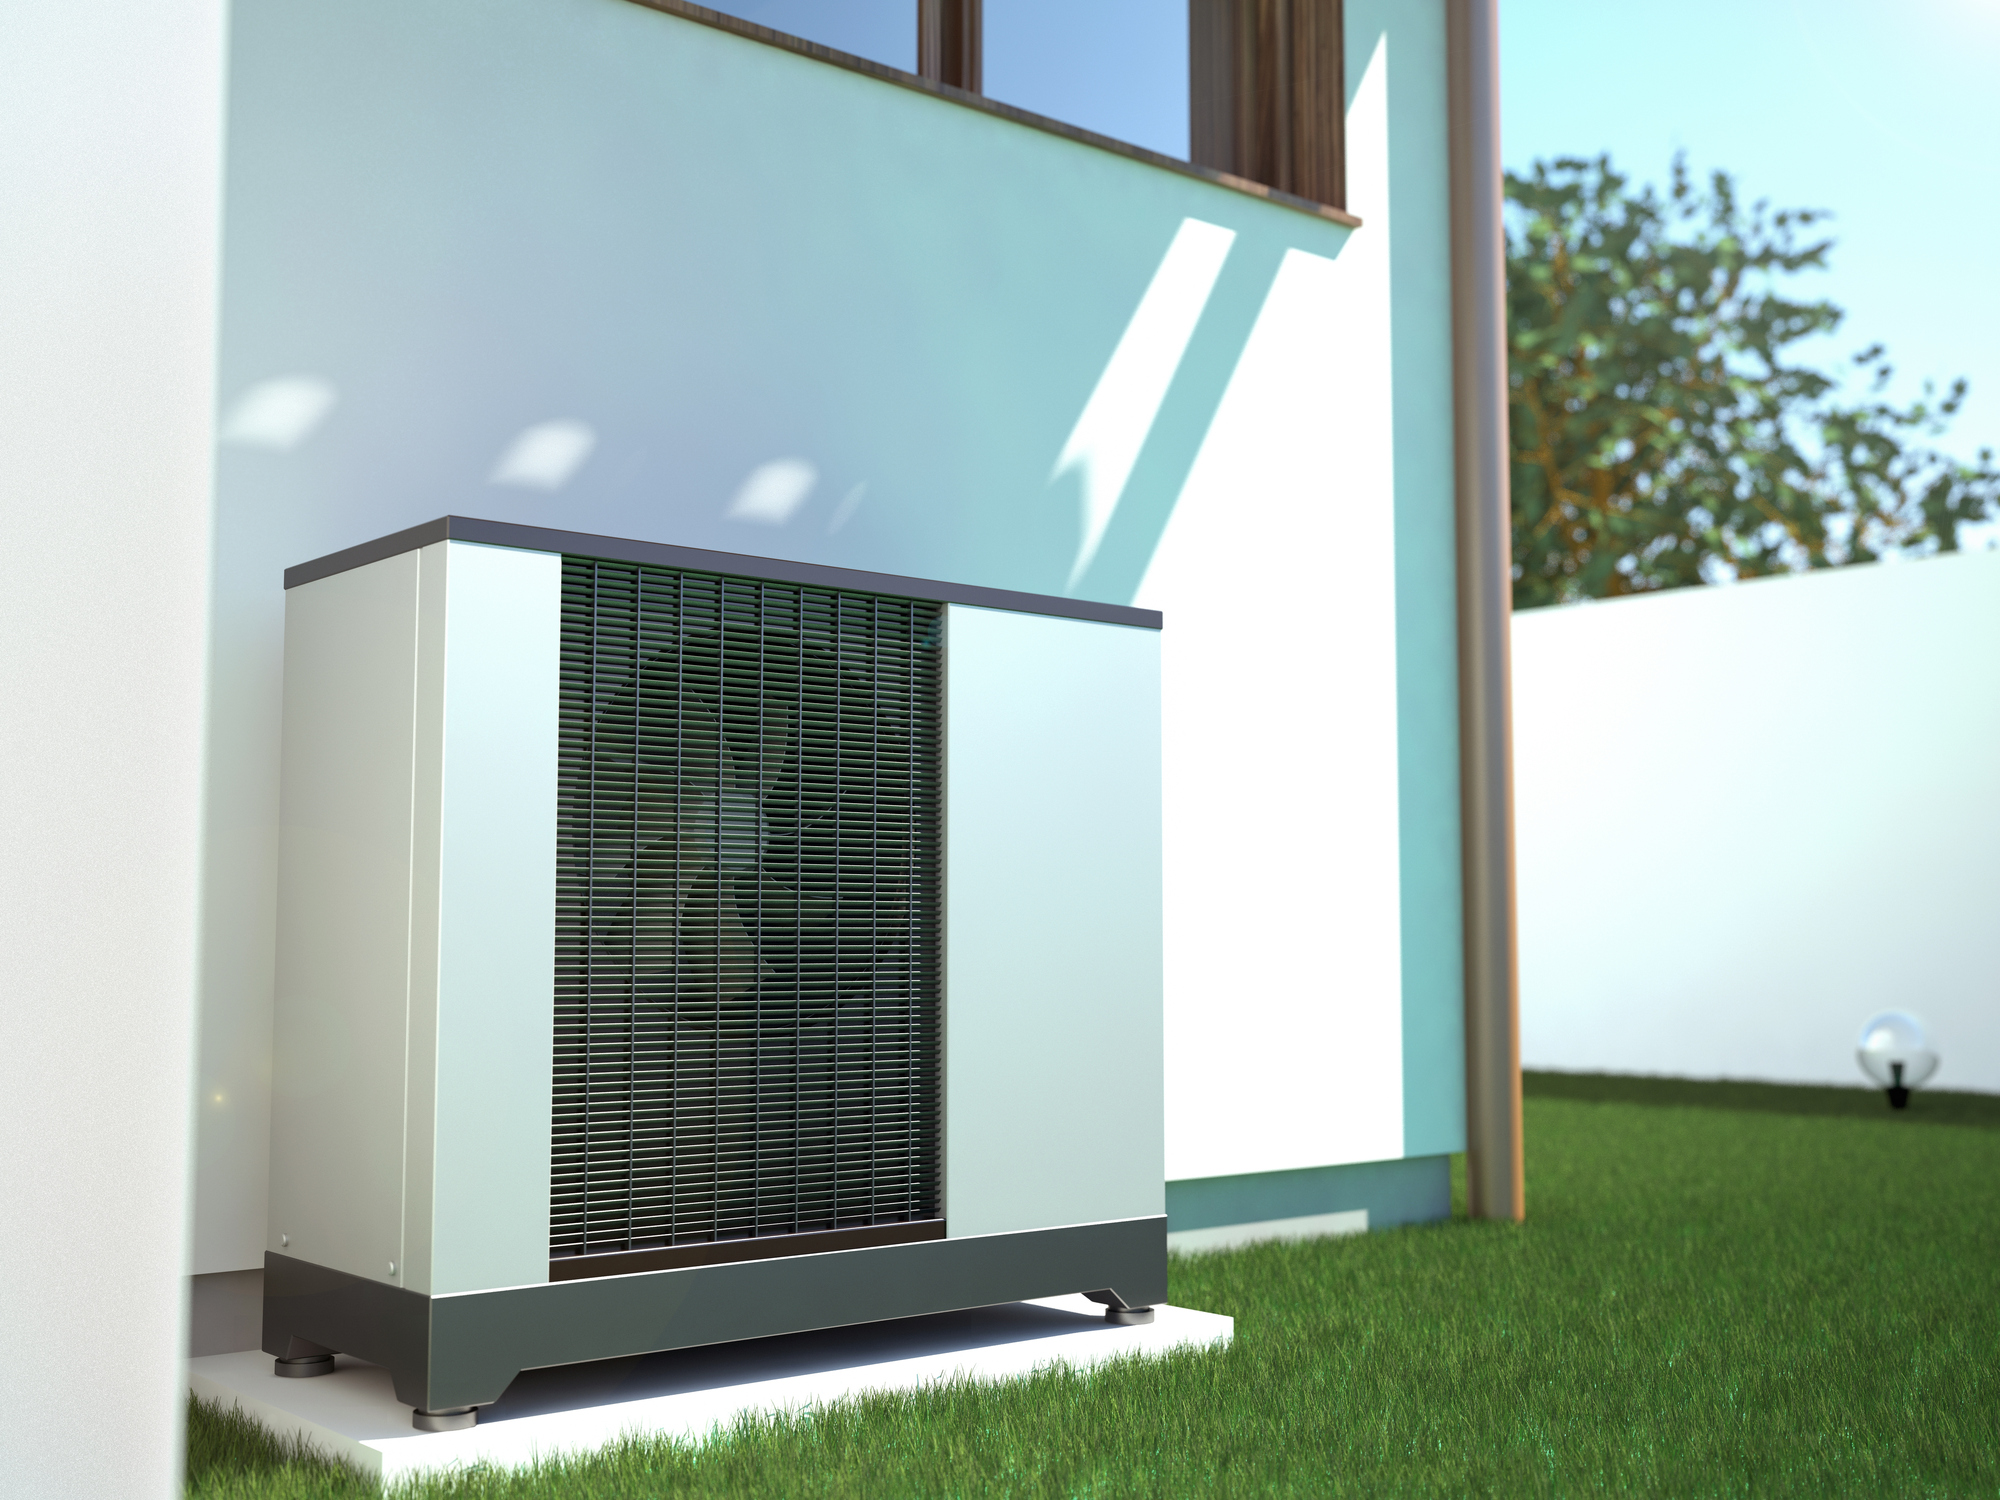 air-source-heat-pumps-eco-homes-now-renewable-energy-systems